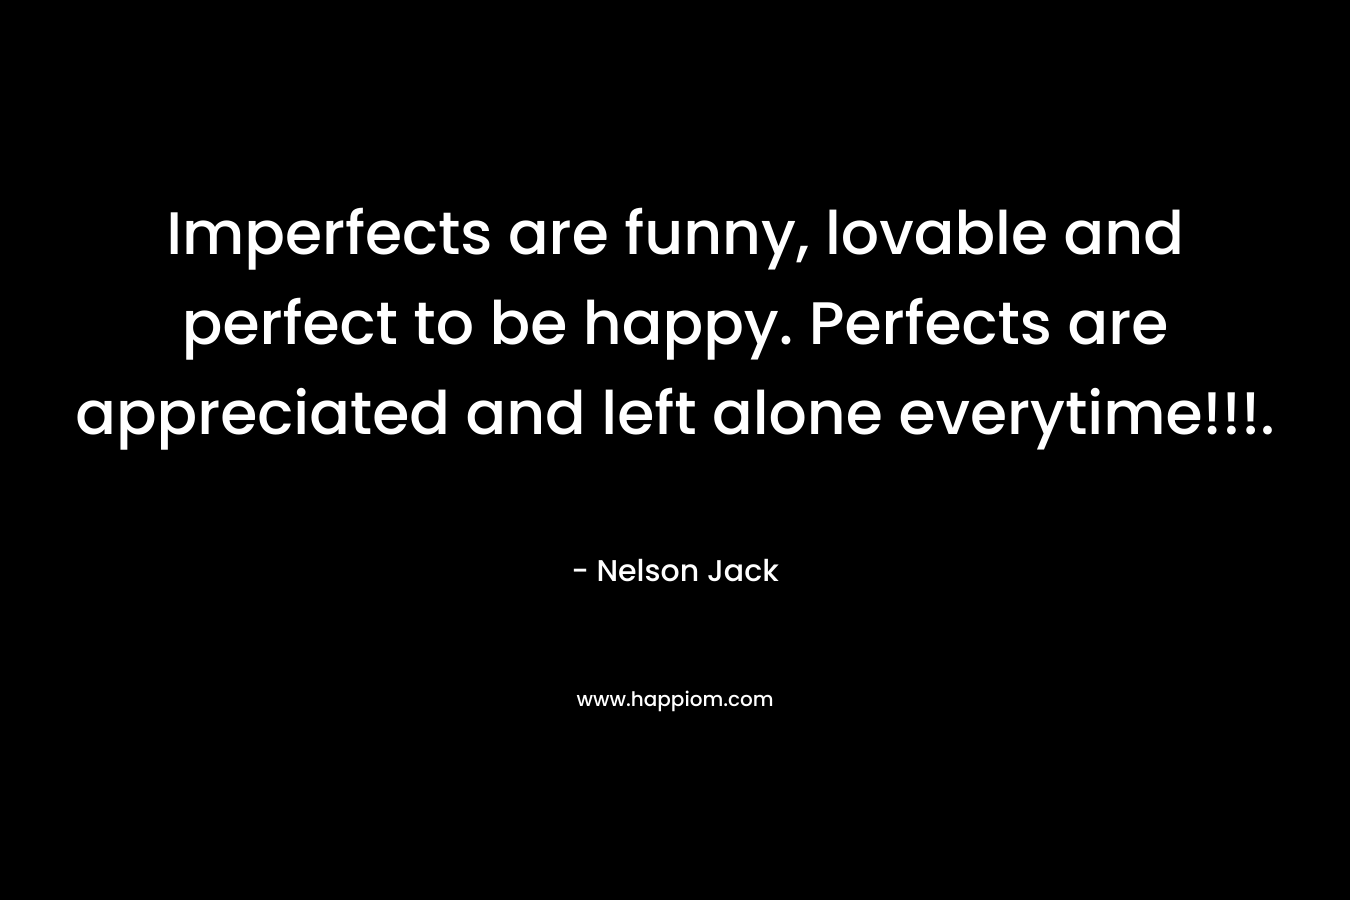 Imperfects are funny, lovable and perfect to be happy. Perfects are appreciated and left alone everytime!!!.